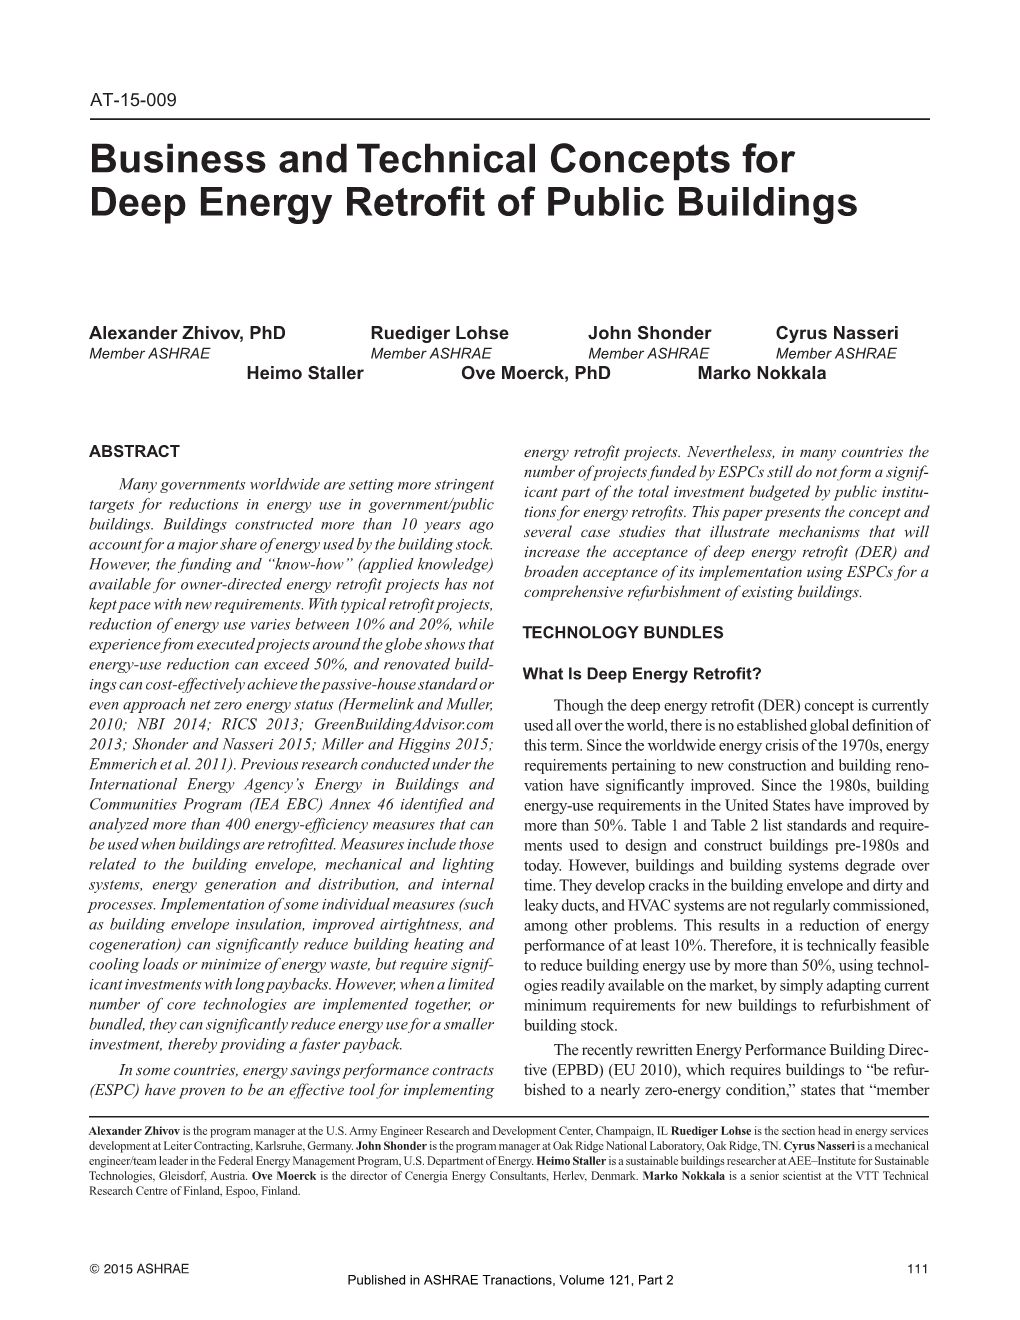 Business and Technical Concepts for Deep Energy Retrofit of Public Buildings